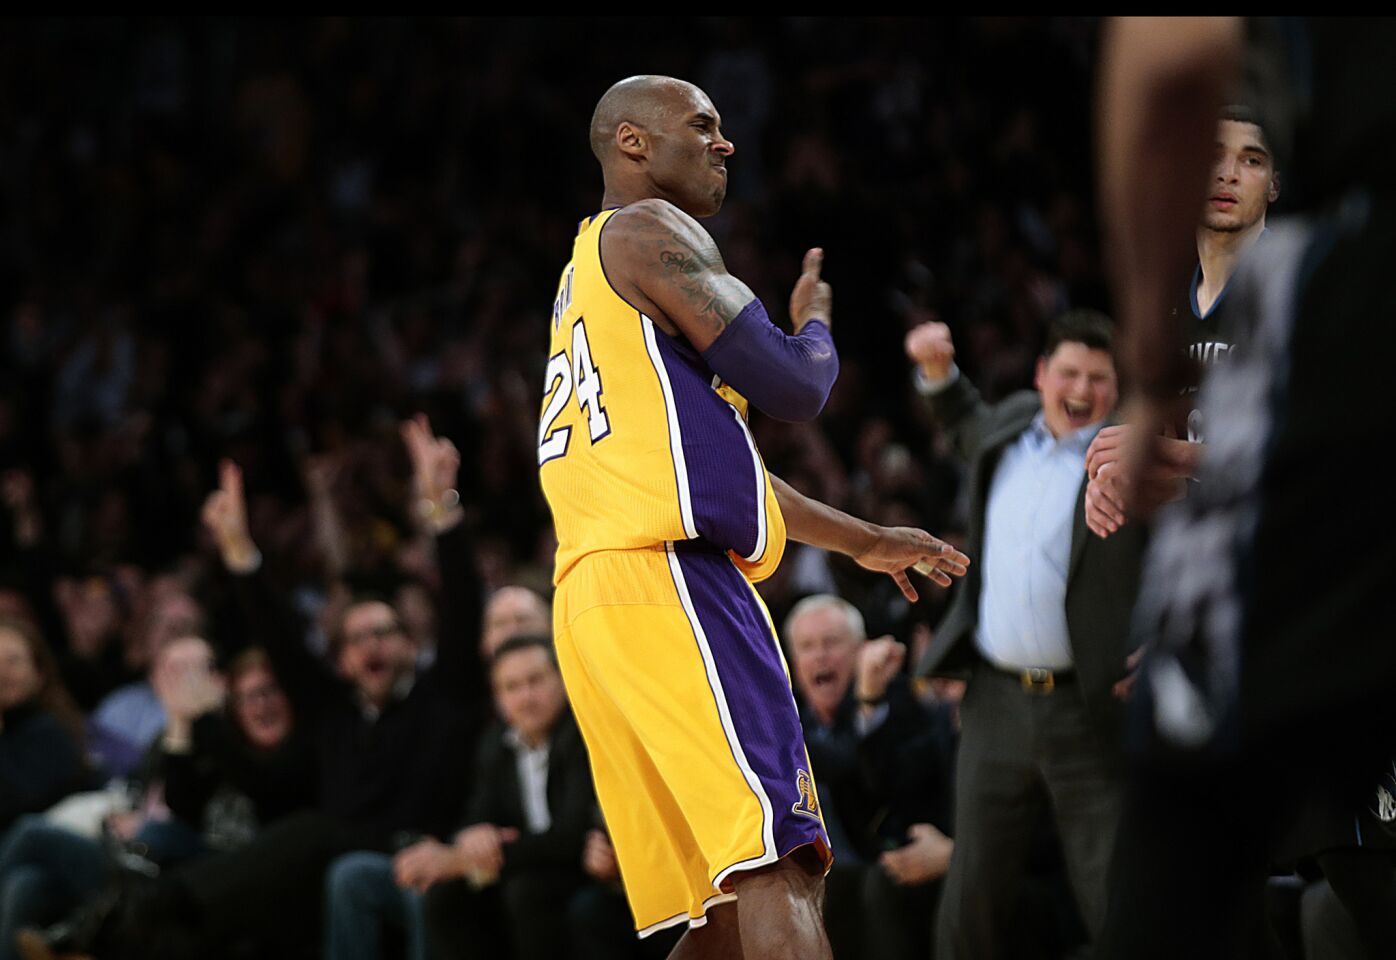 A determined Kobe Bryant pounds his chest after hitting a three-pointer against the Timberwolves late in the second quarter of a game at Staples Center on Feb. 2.